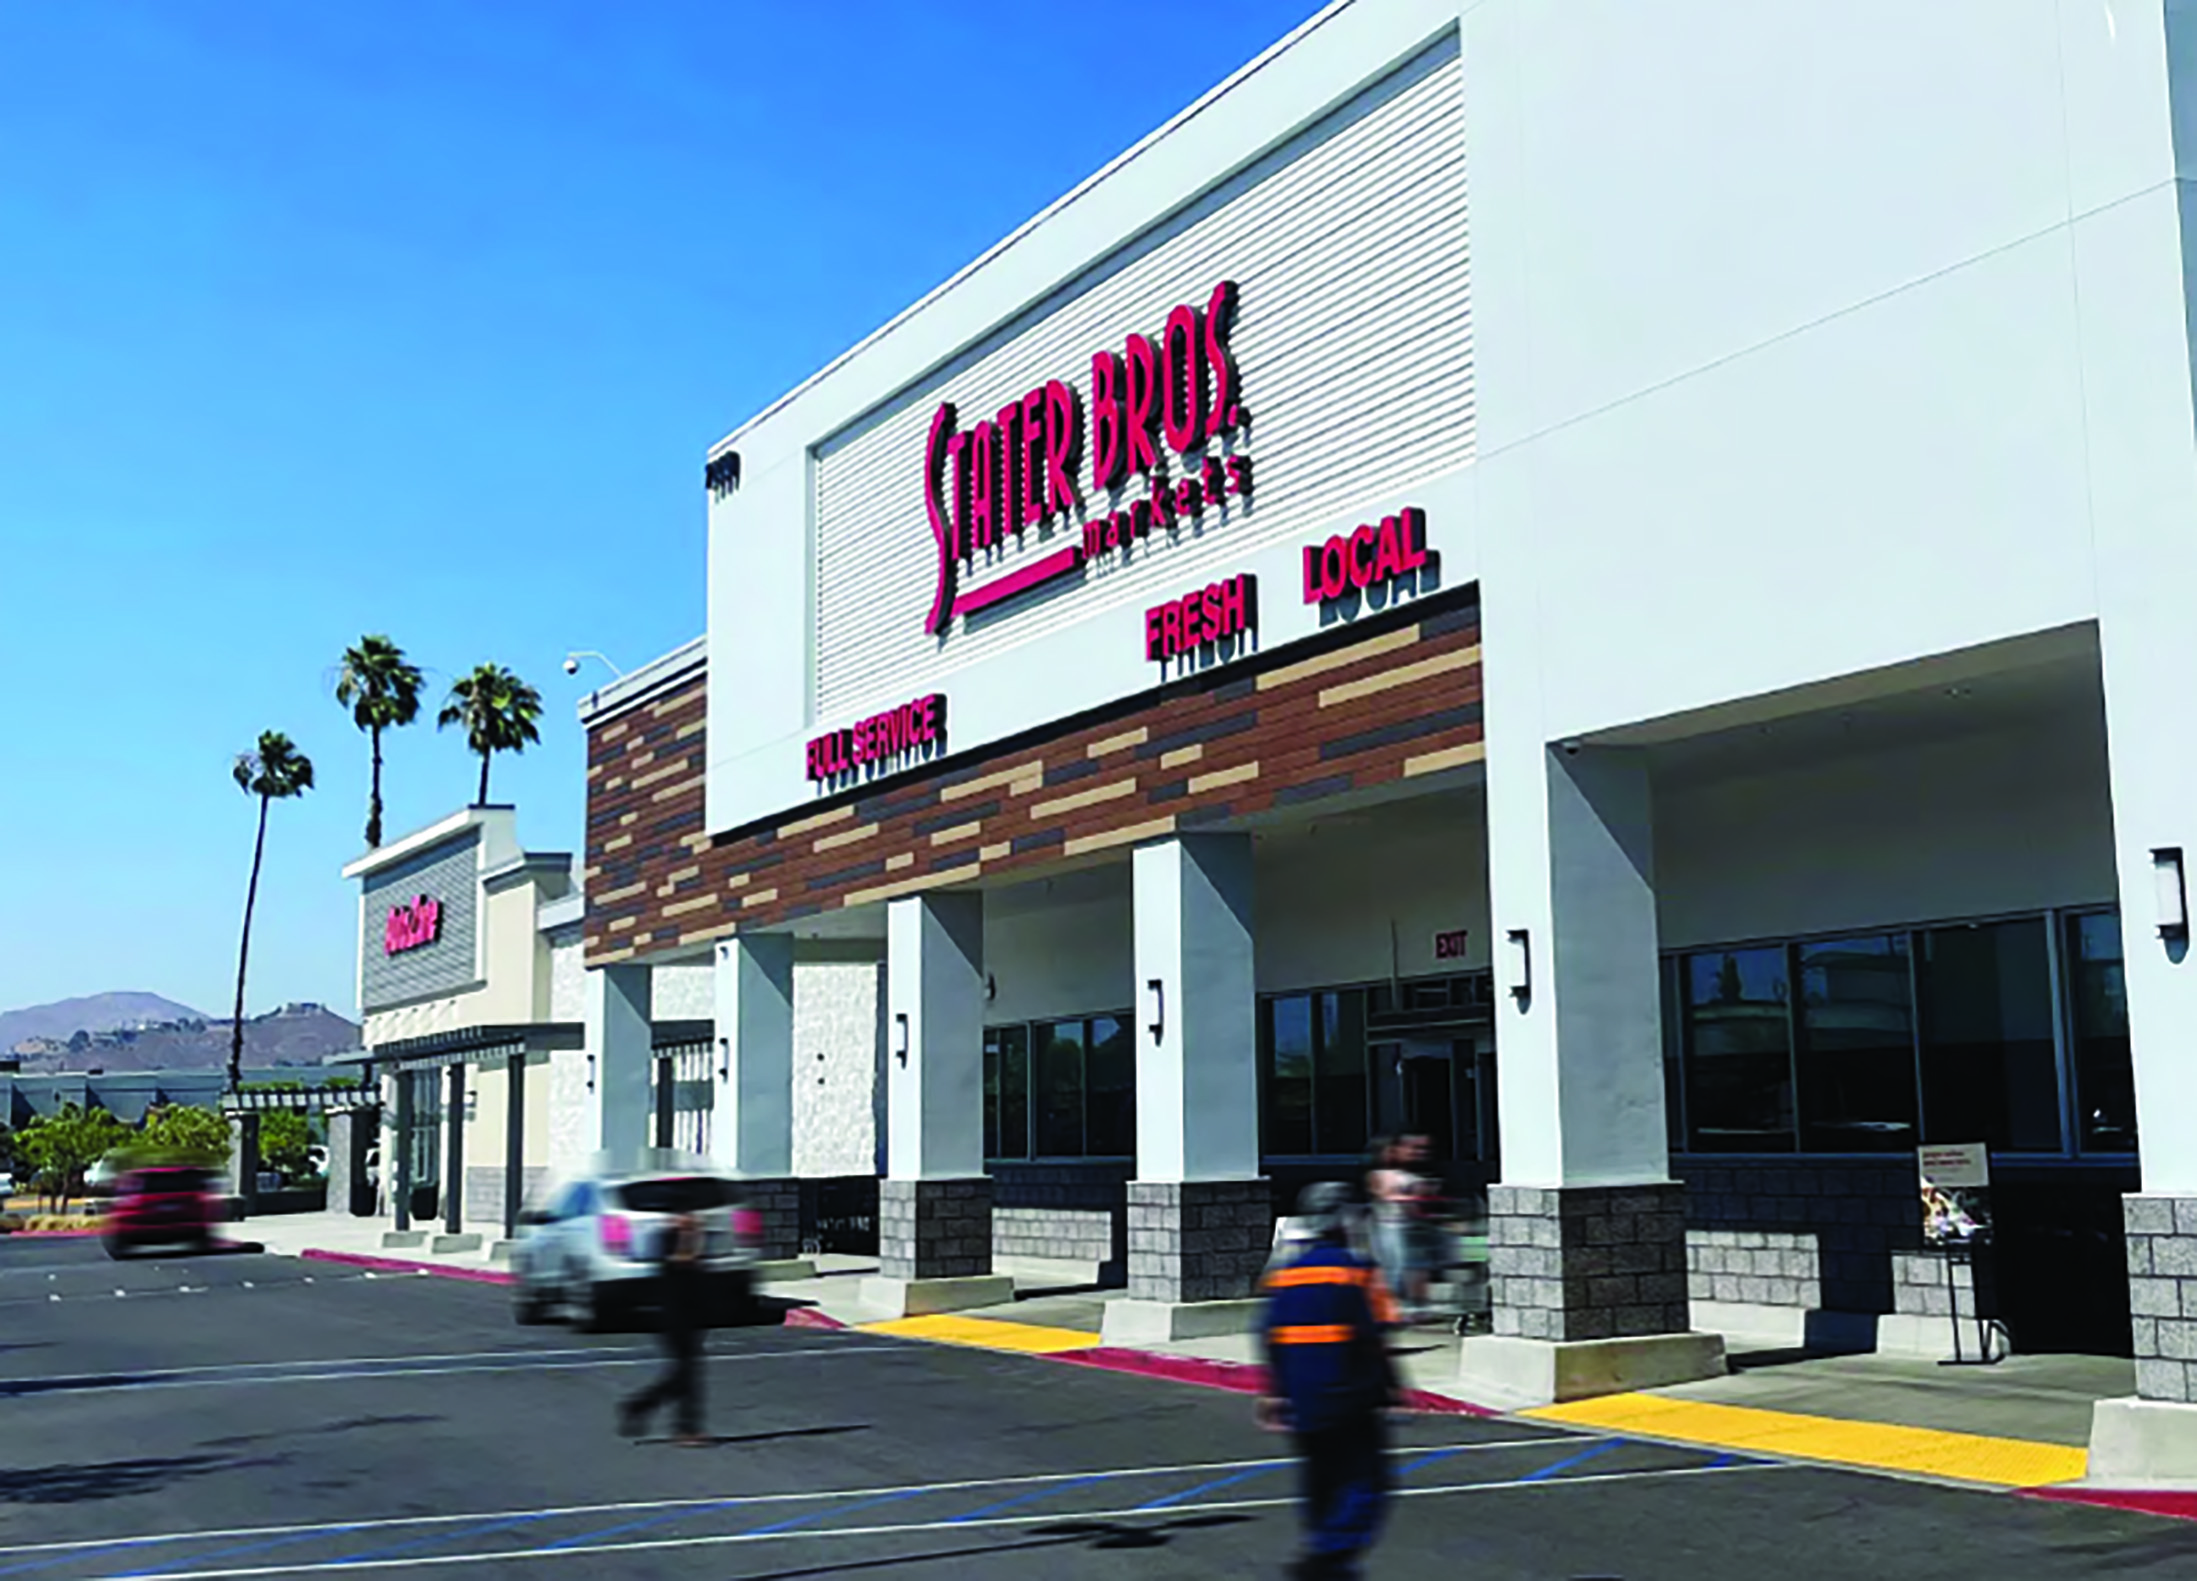 Hanley Investment Group Facilitates Acquisition of Five Retail Outparcels From Paragon Commercial Group at Grocery-Anchored Shopping Center in Riverside, Calif.